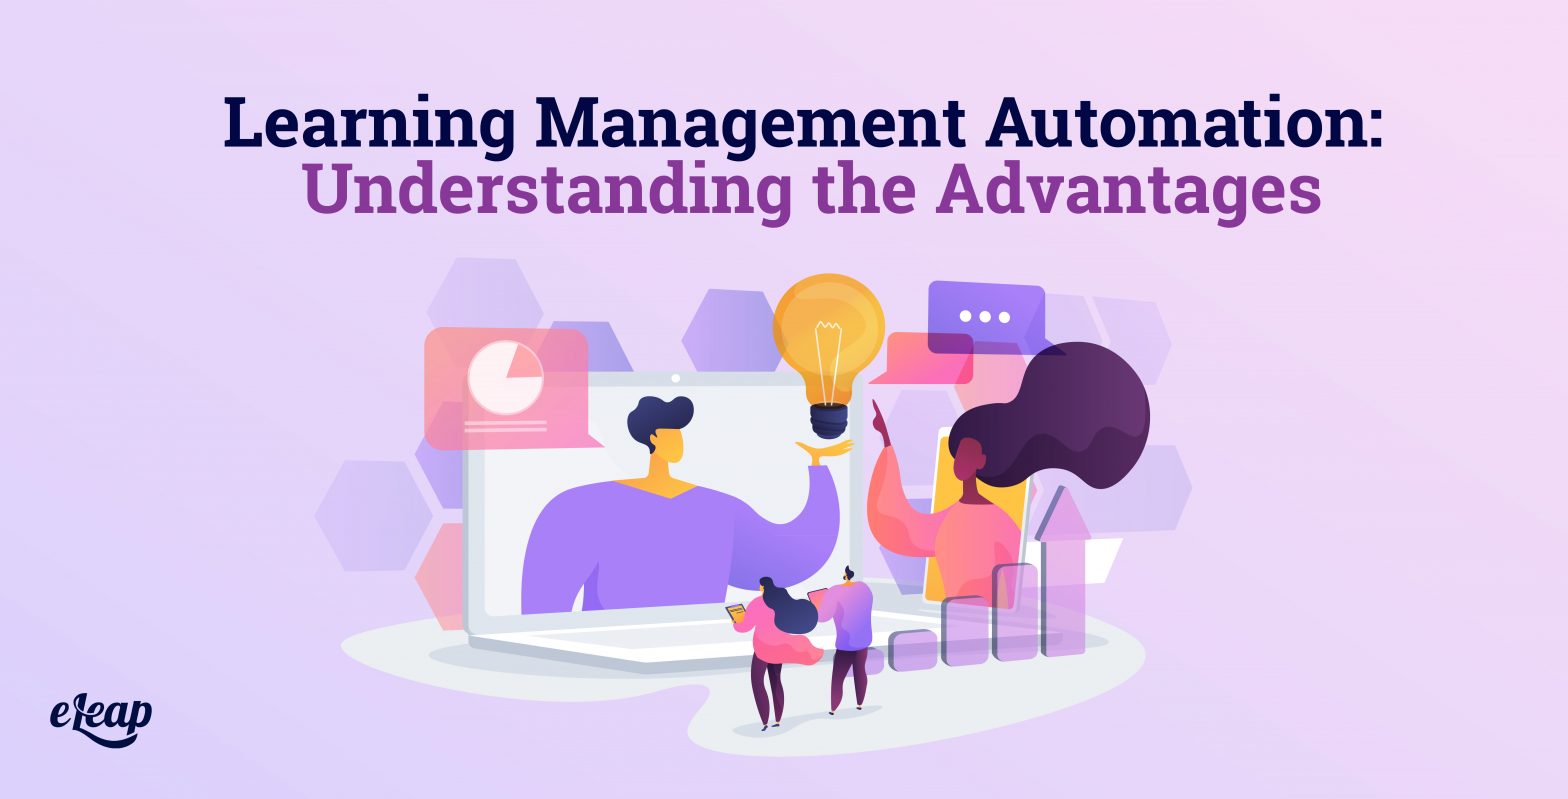 Learning Management Automation: Understanding the Advantages